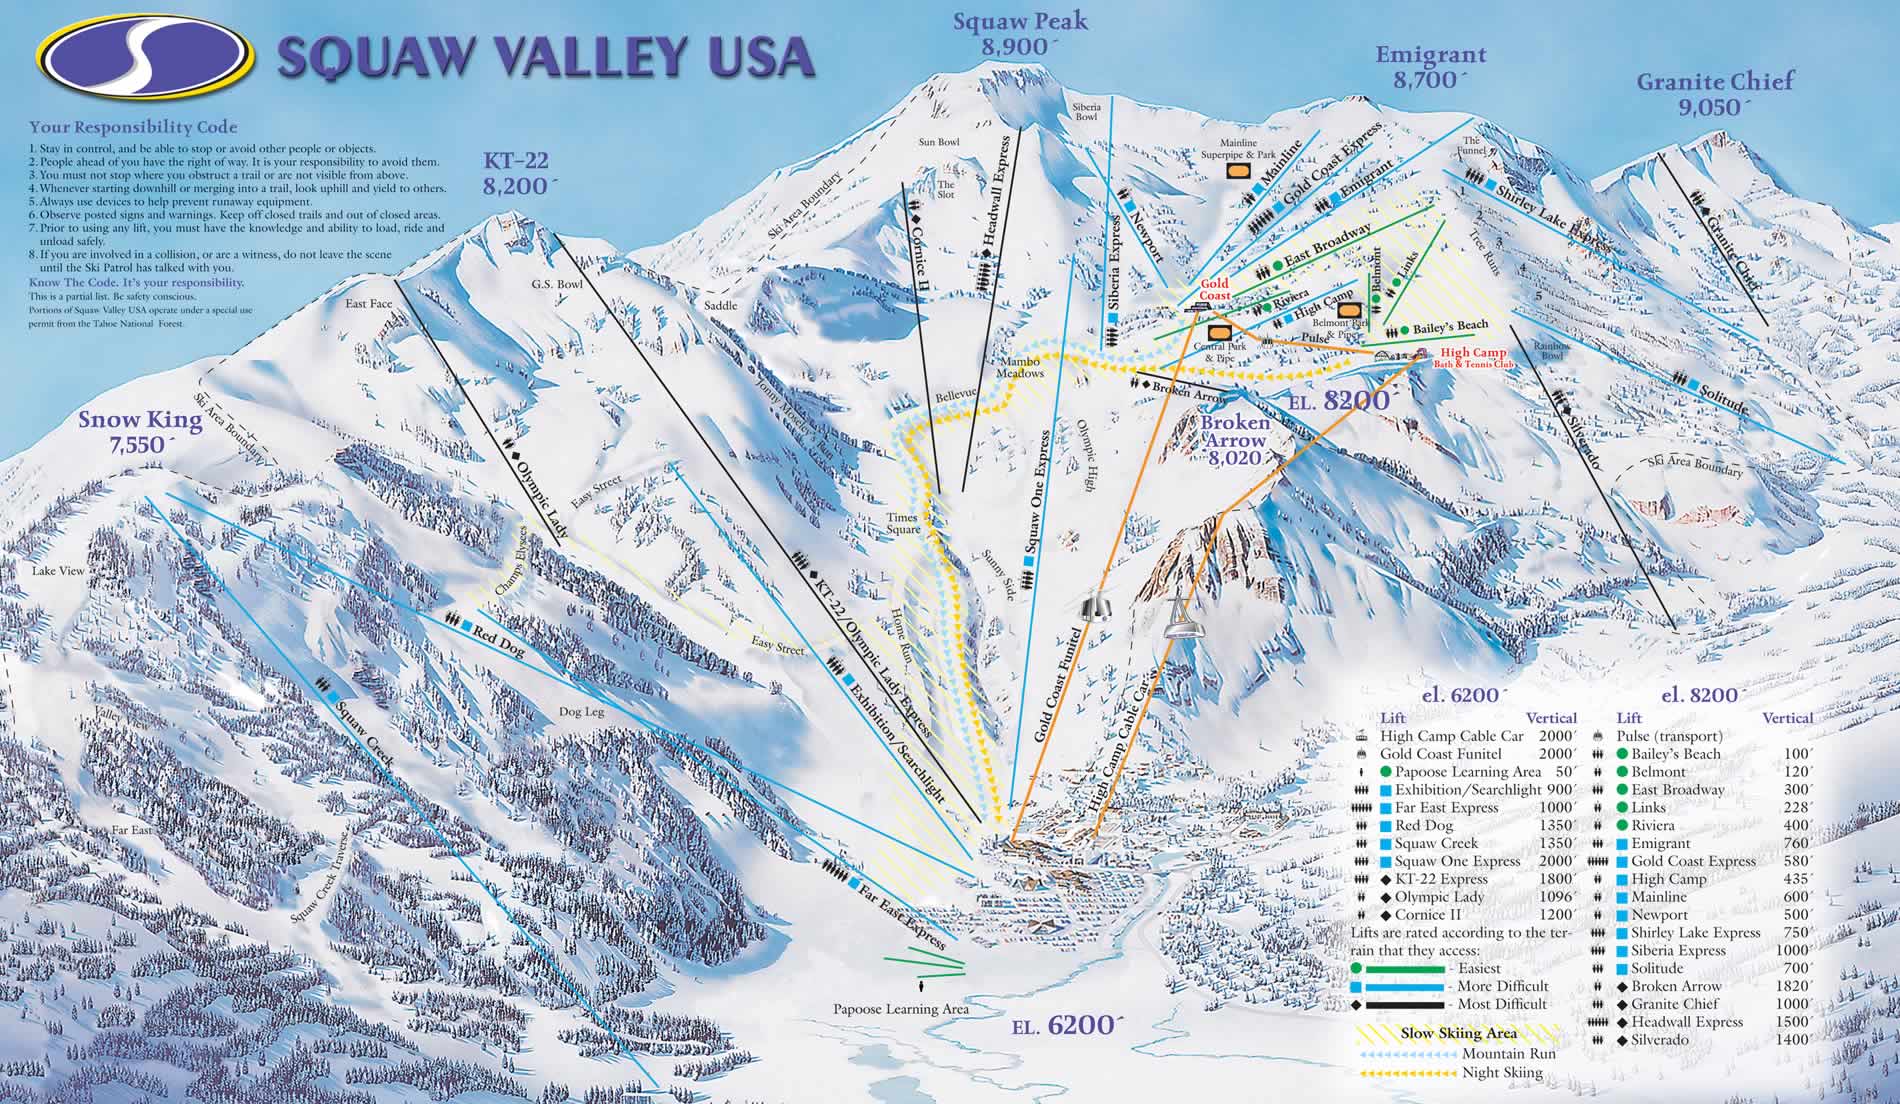 Squaw Valley trail map